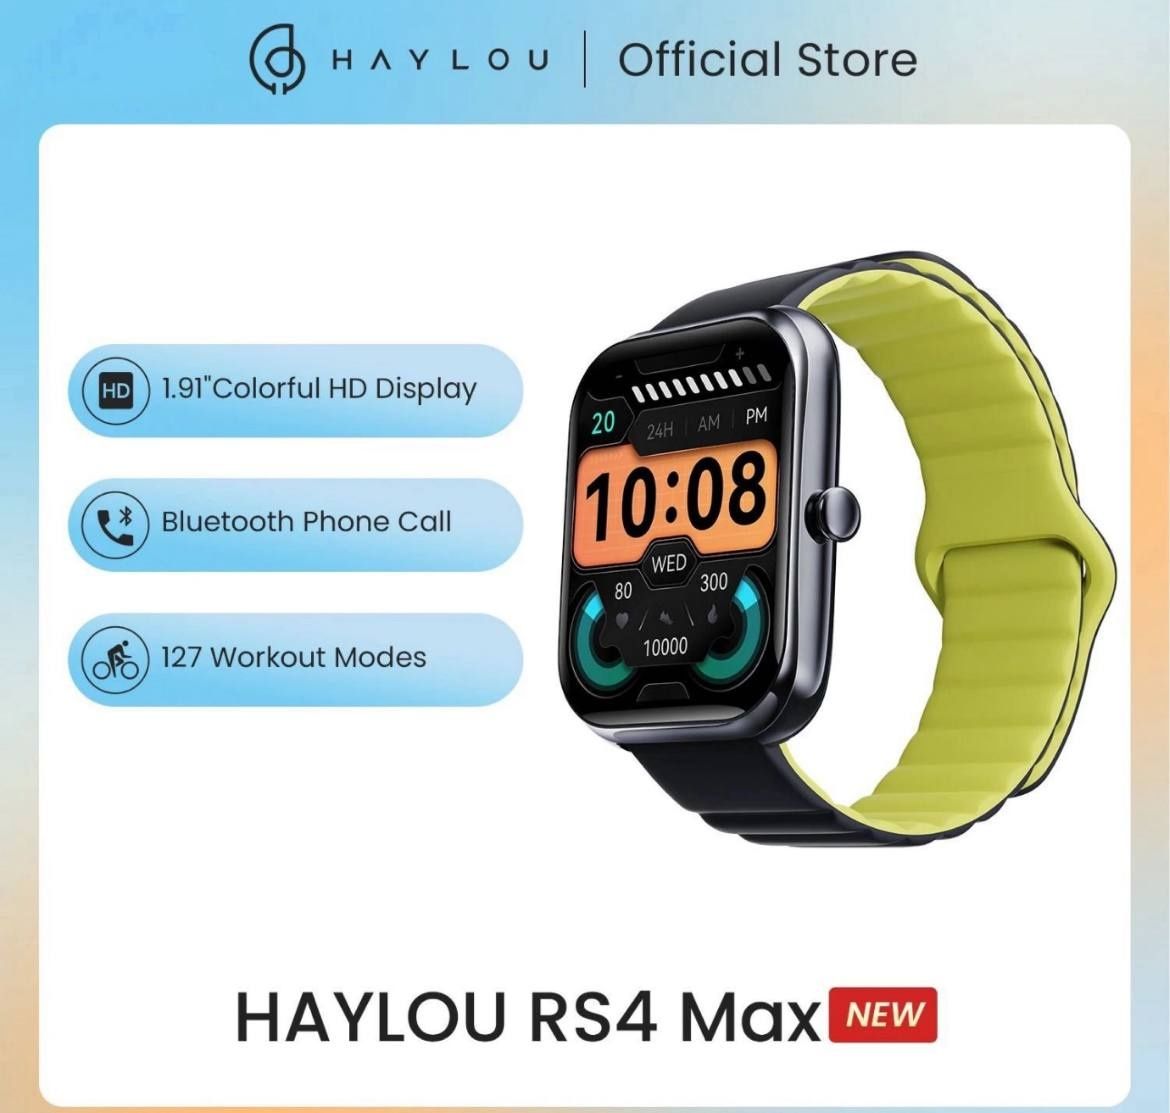 Haylou Rs Max model